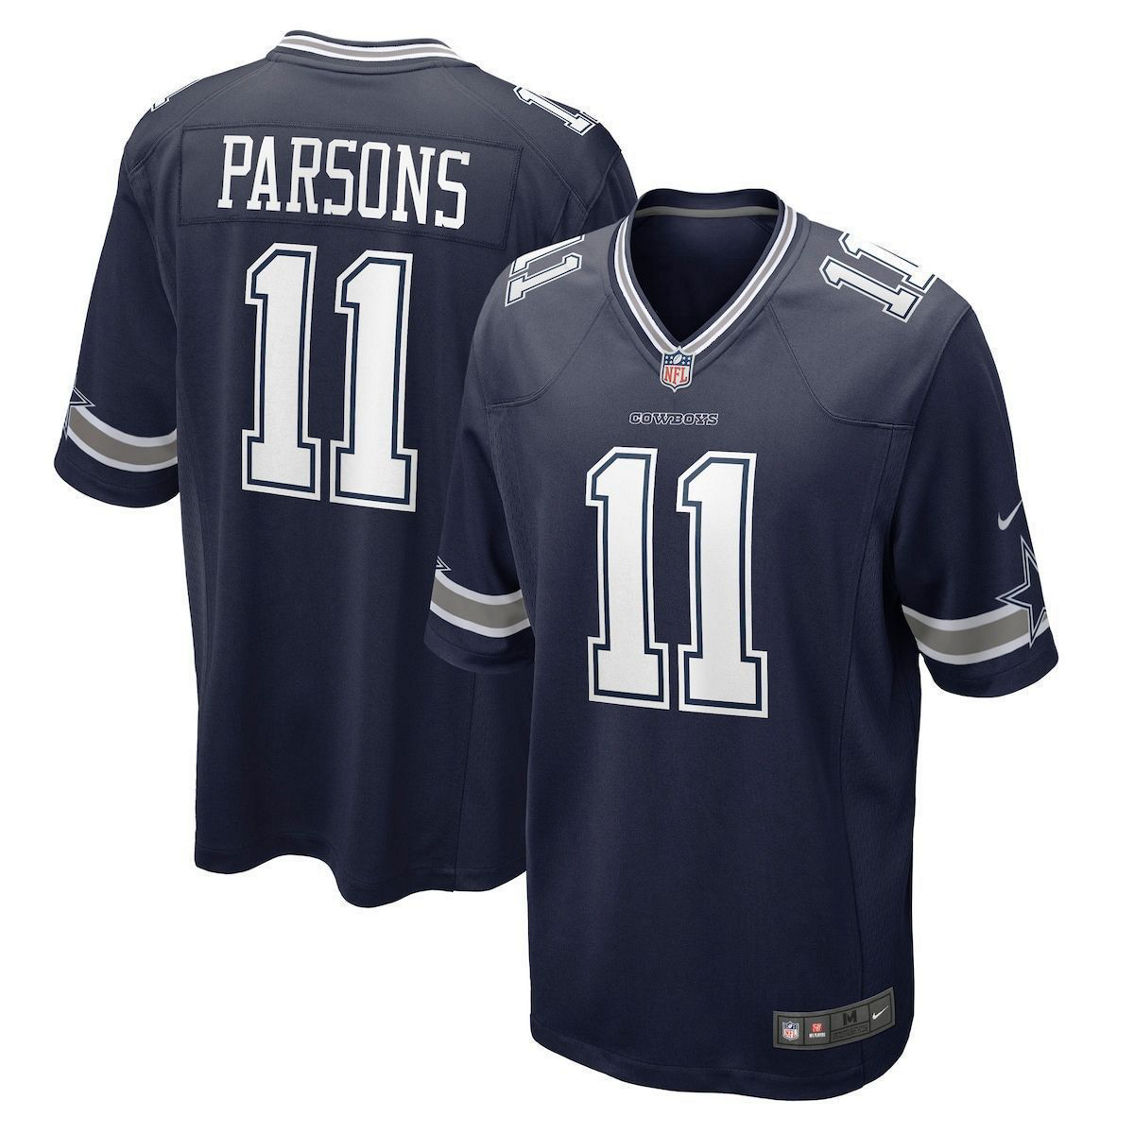 Nike Youth Micah Parsons Navy Dallas Cowboys Game Jersey - Image 2 of 4